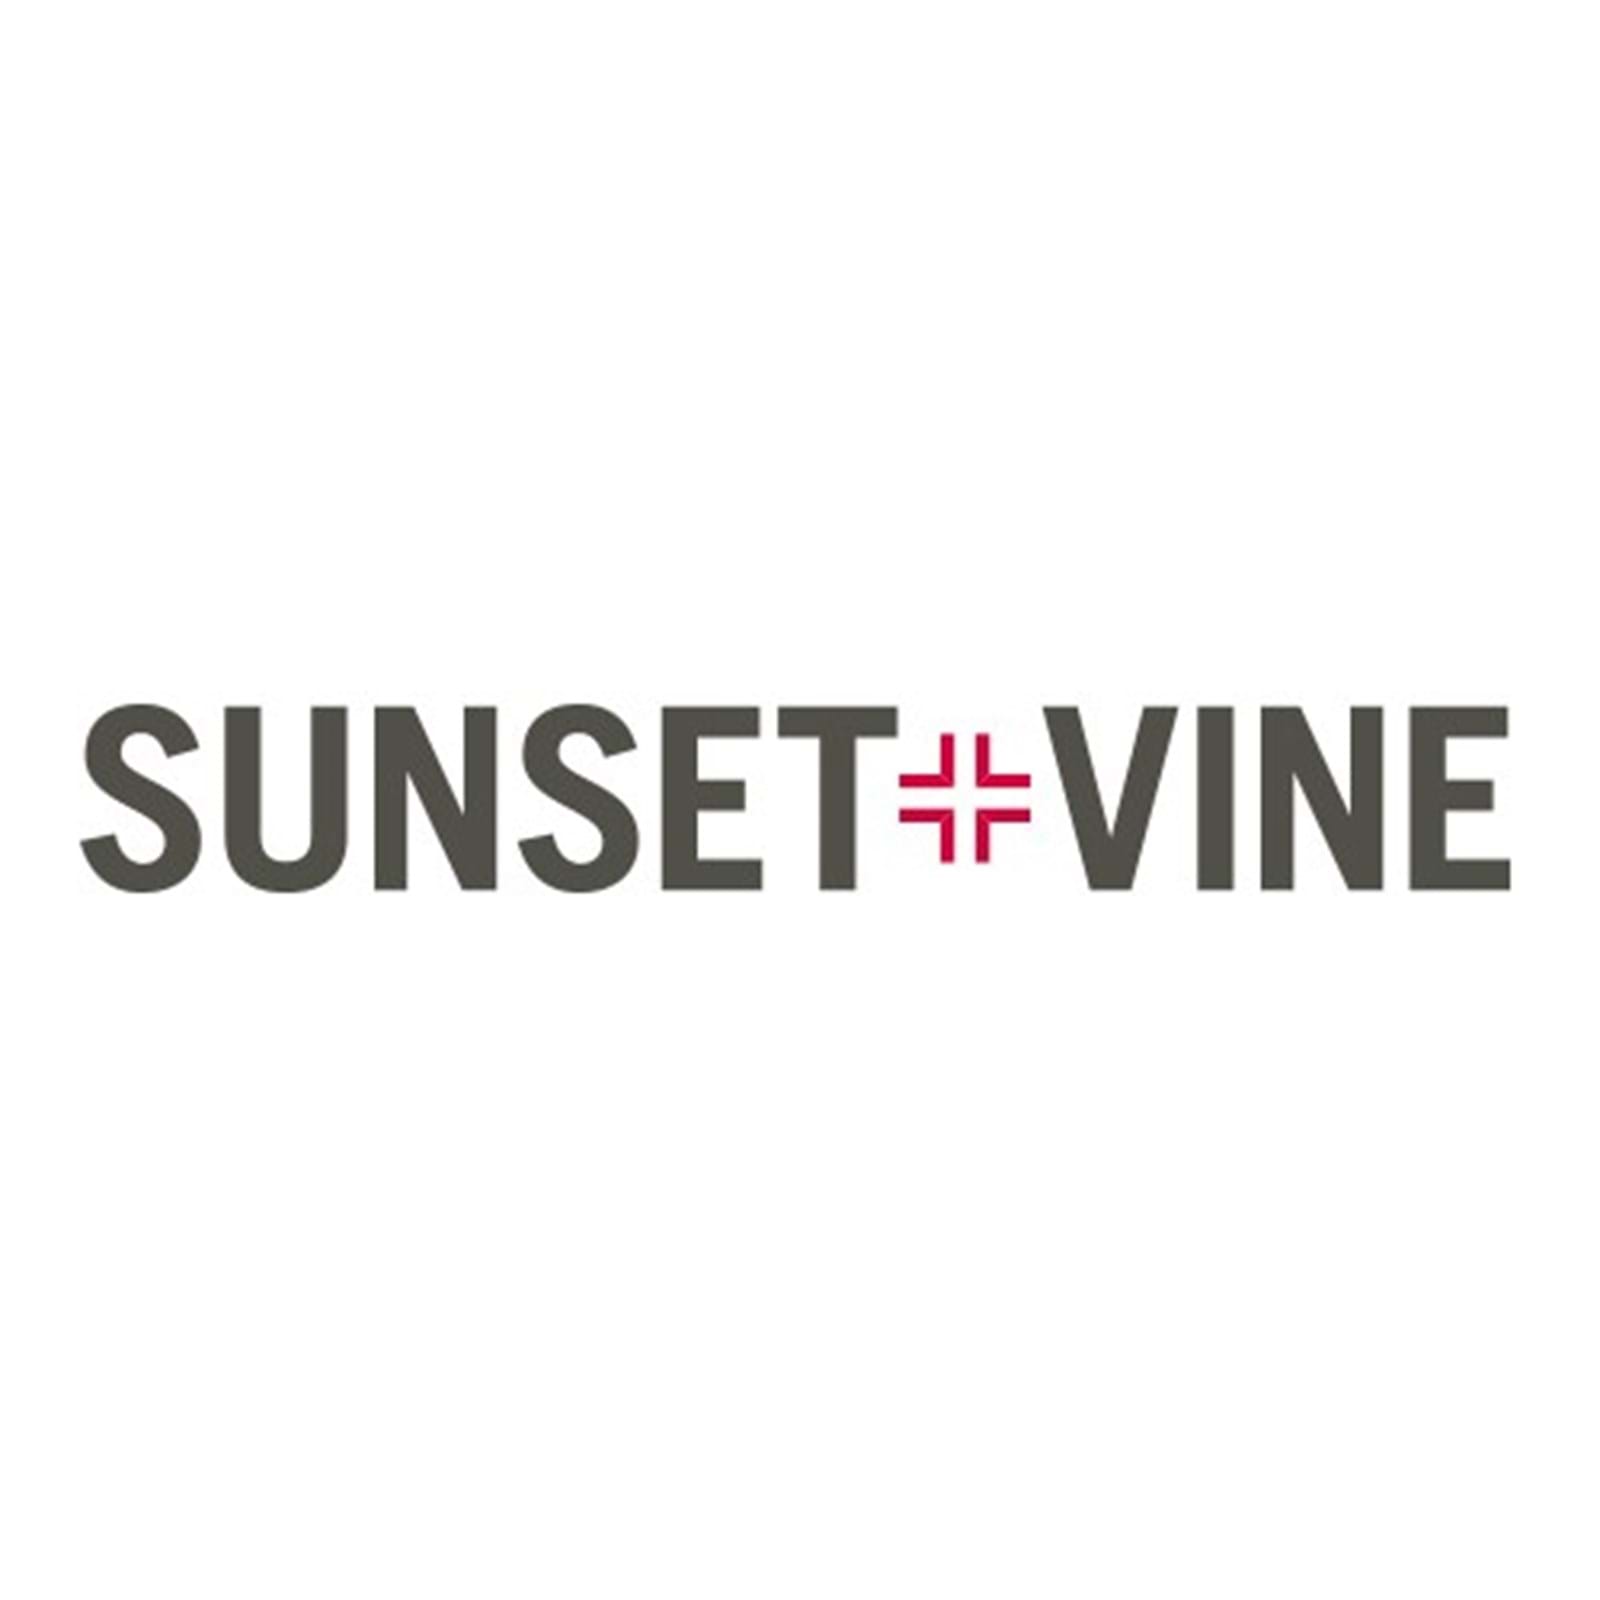 SUNSET+VINE WIN BEST SPORTS PROGRAMME AT THE BROADCAST AWARDS 2017